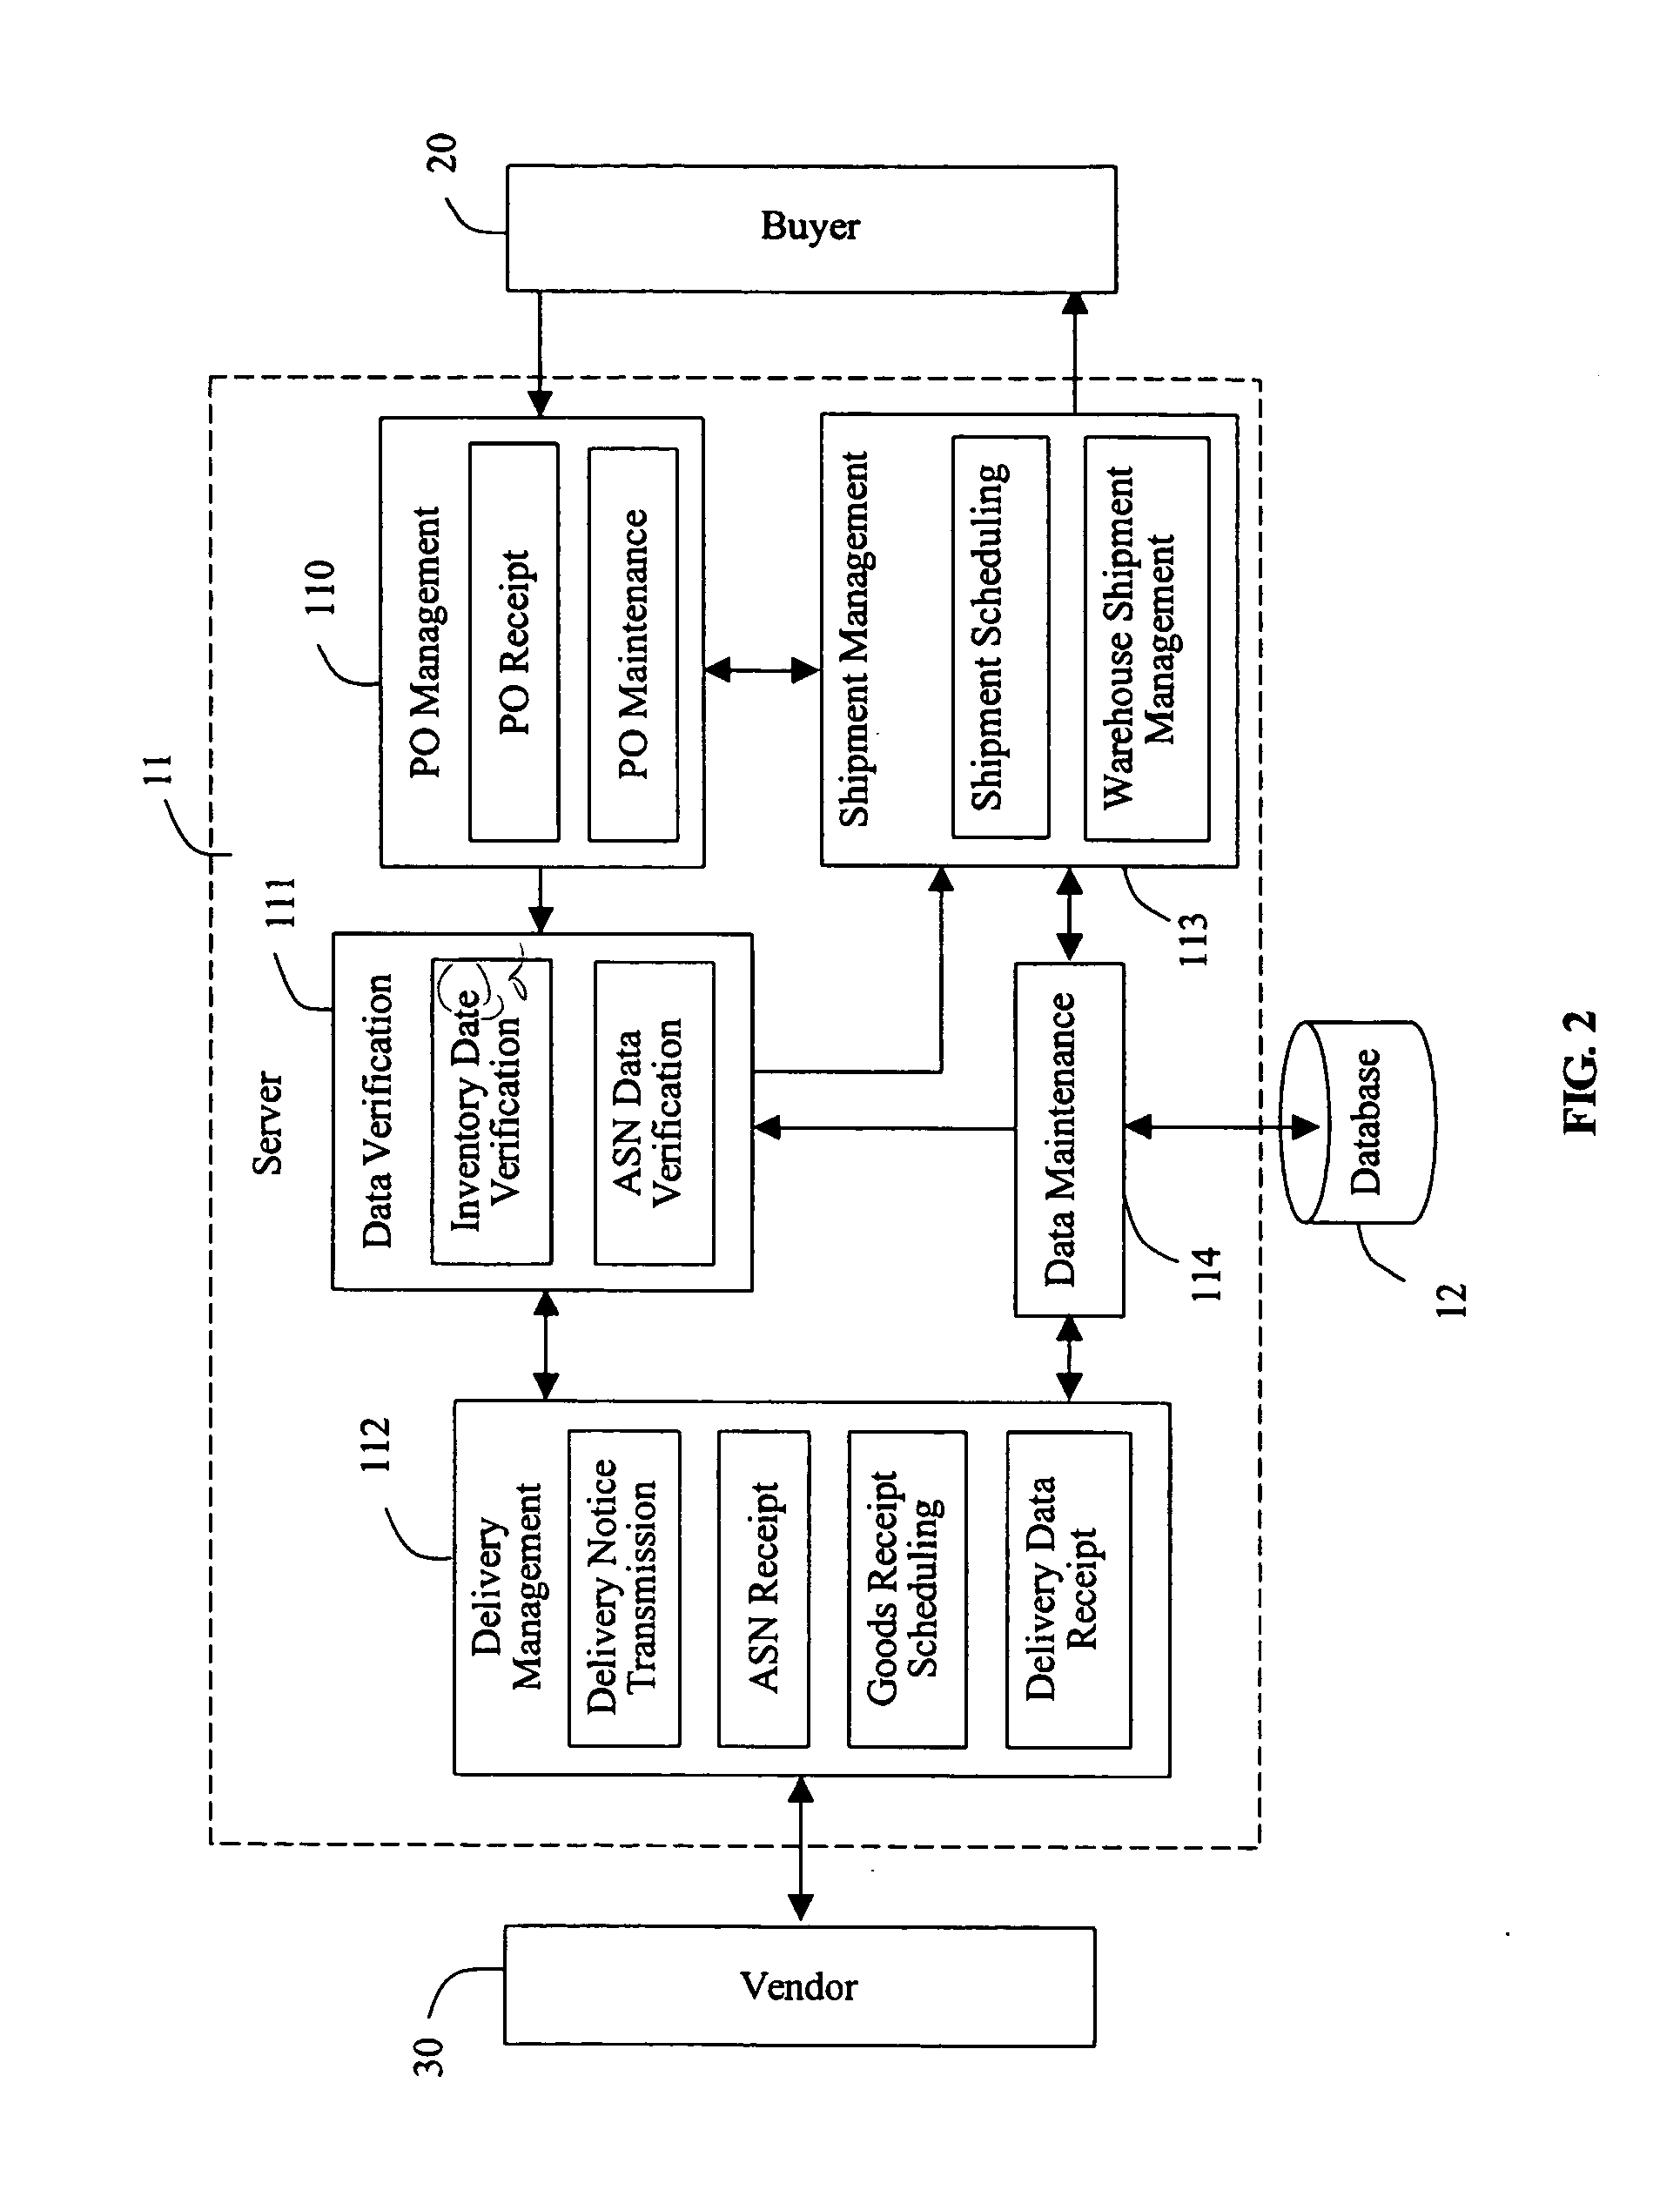 System and method for managing shipment in a supply chain